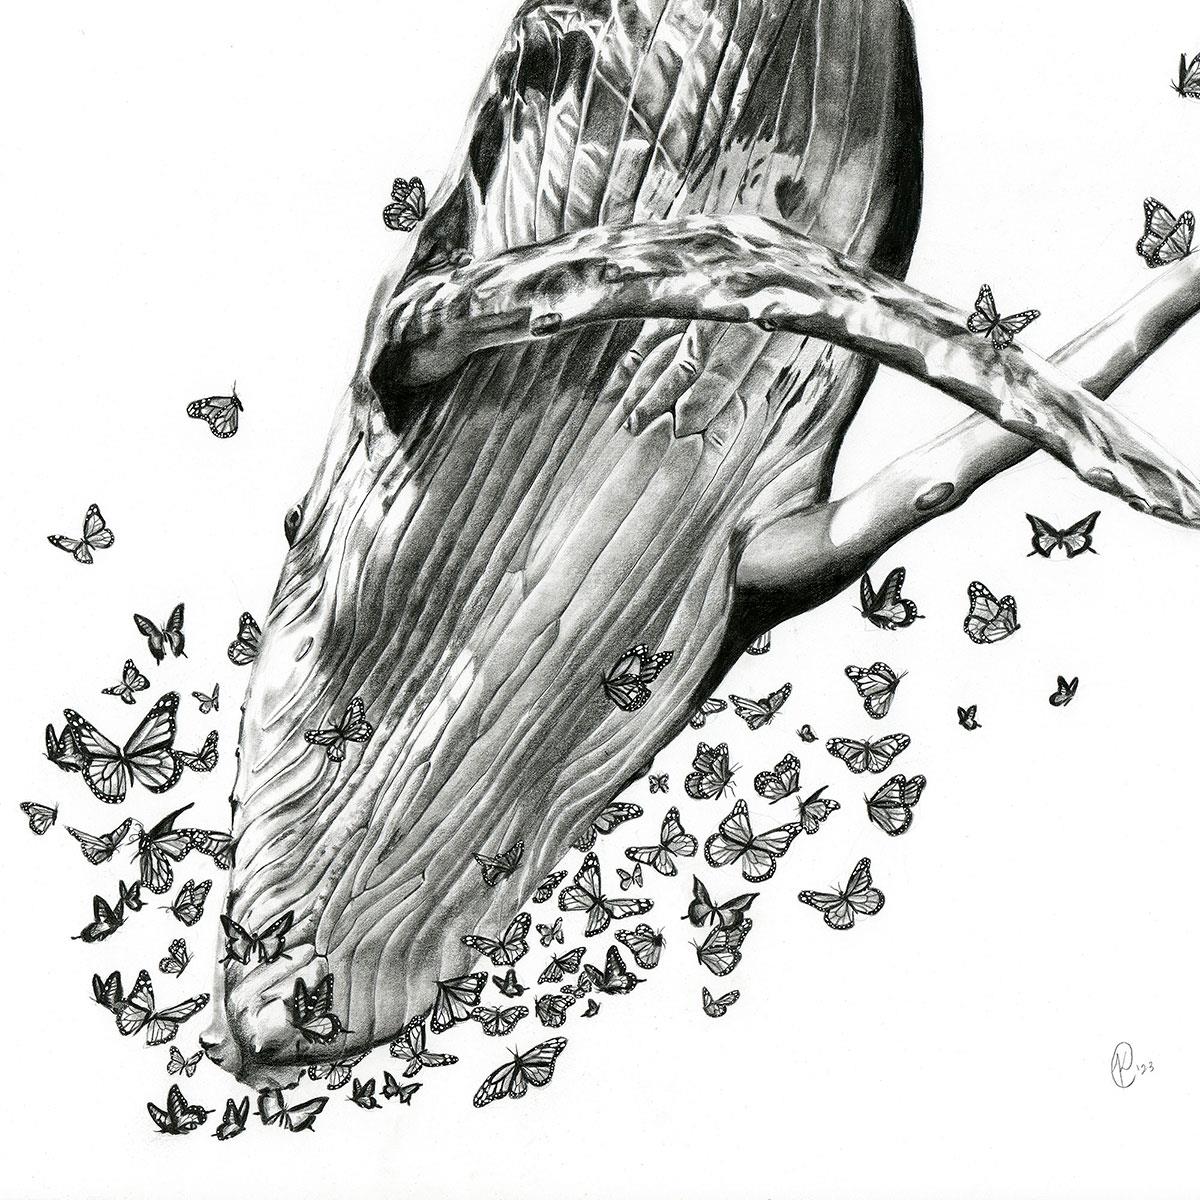 photorealist pencil drawing of a whale and butterflies